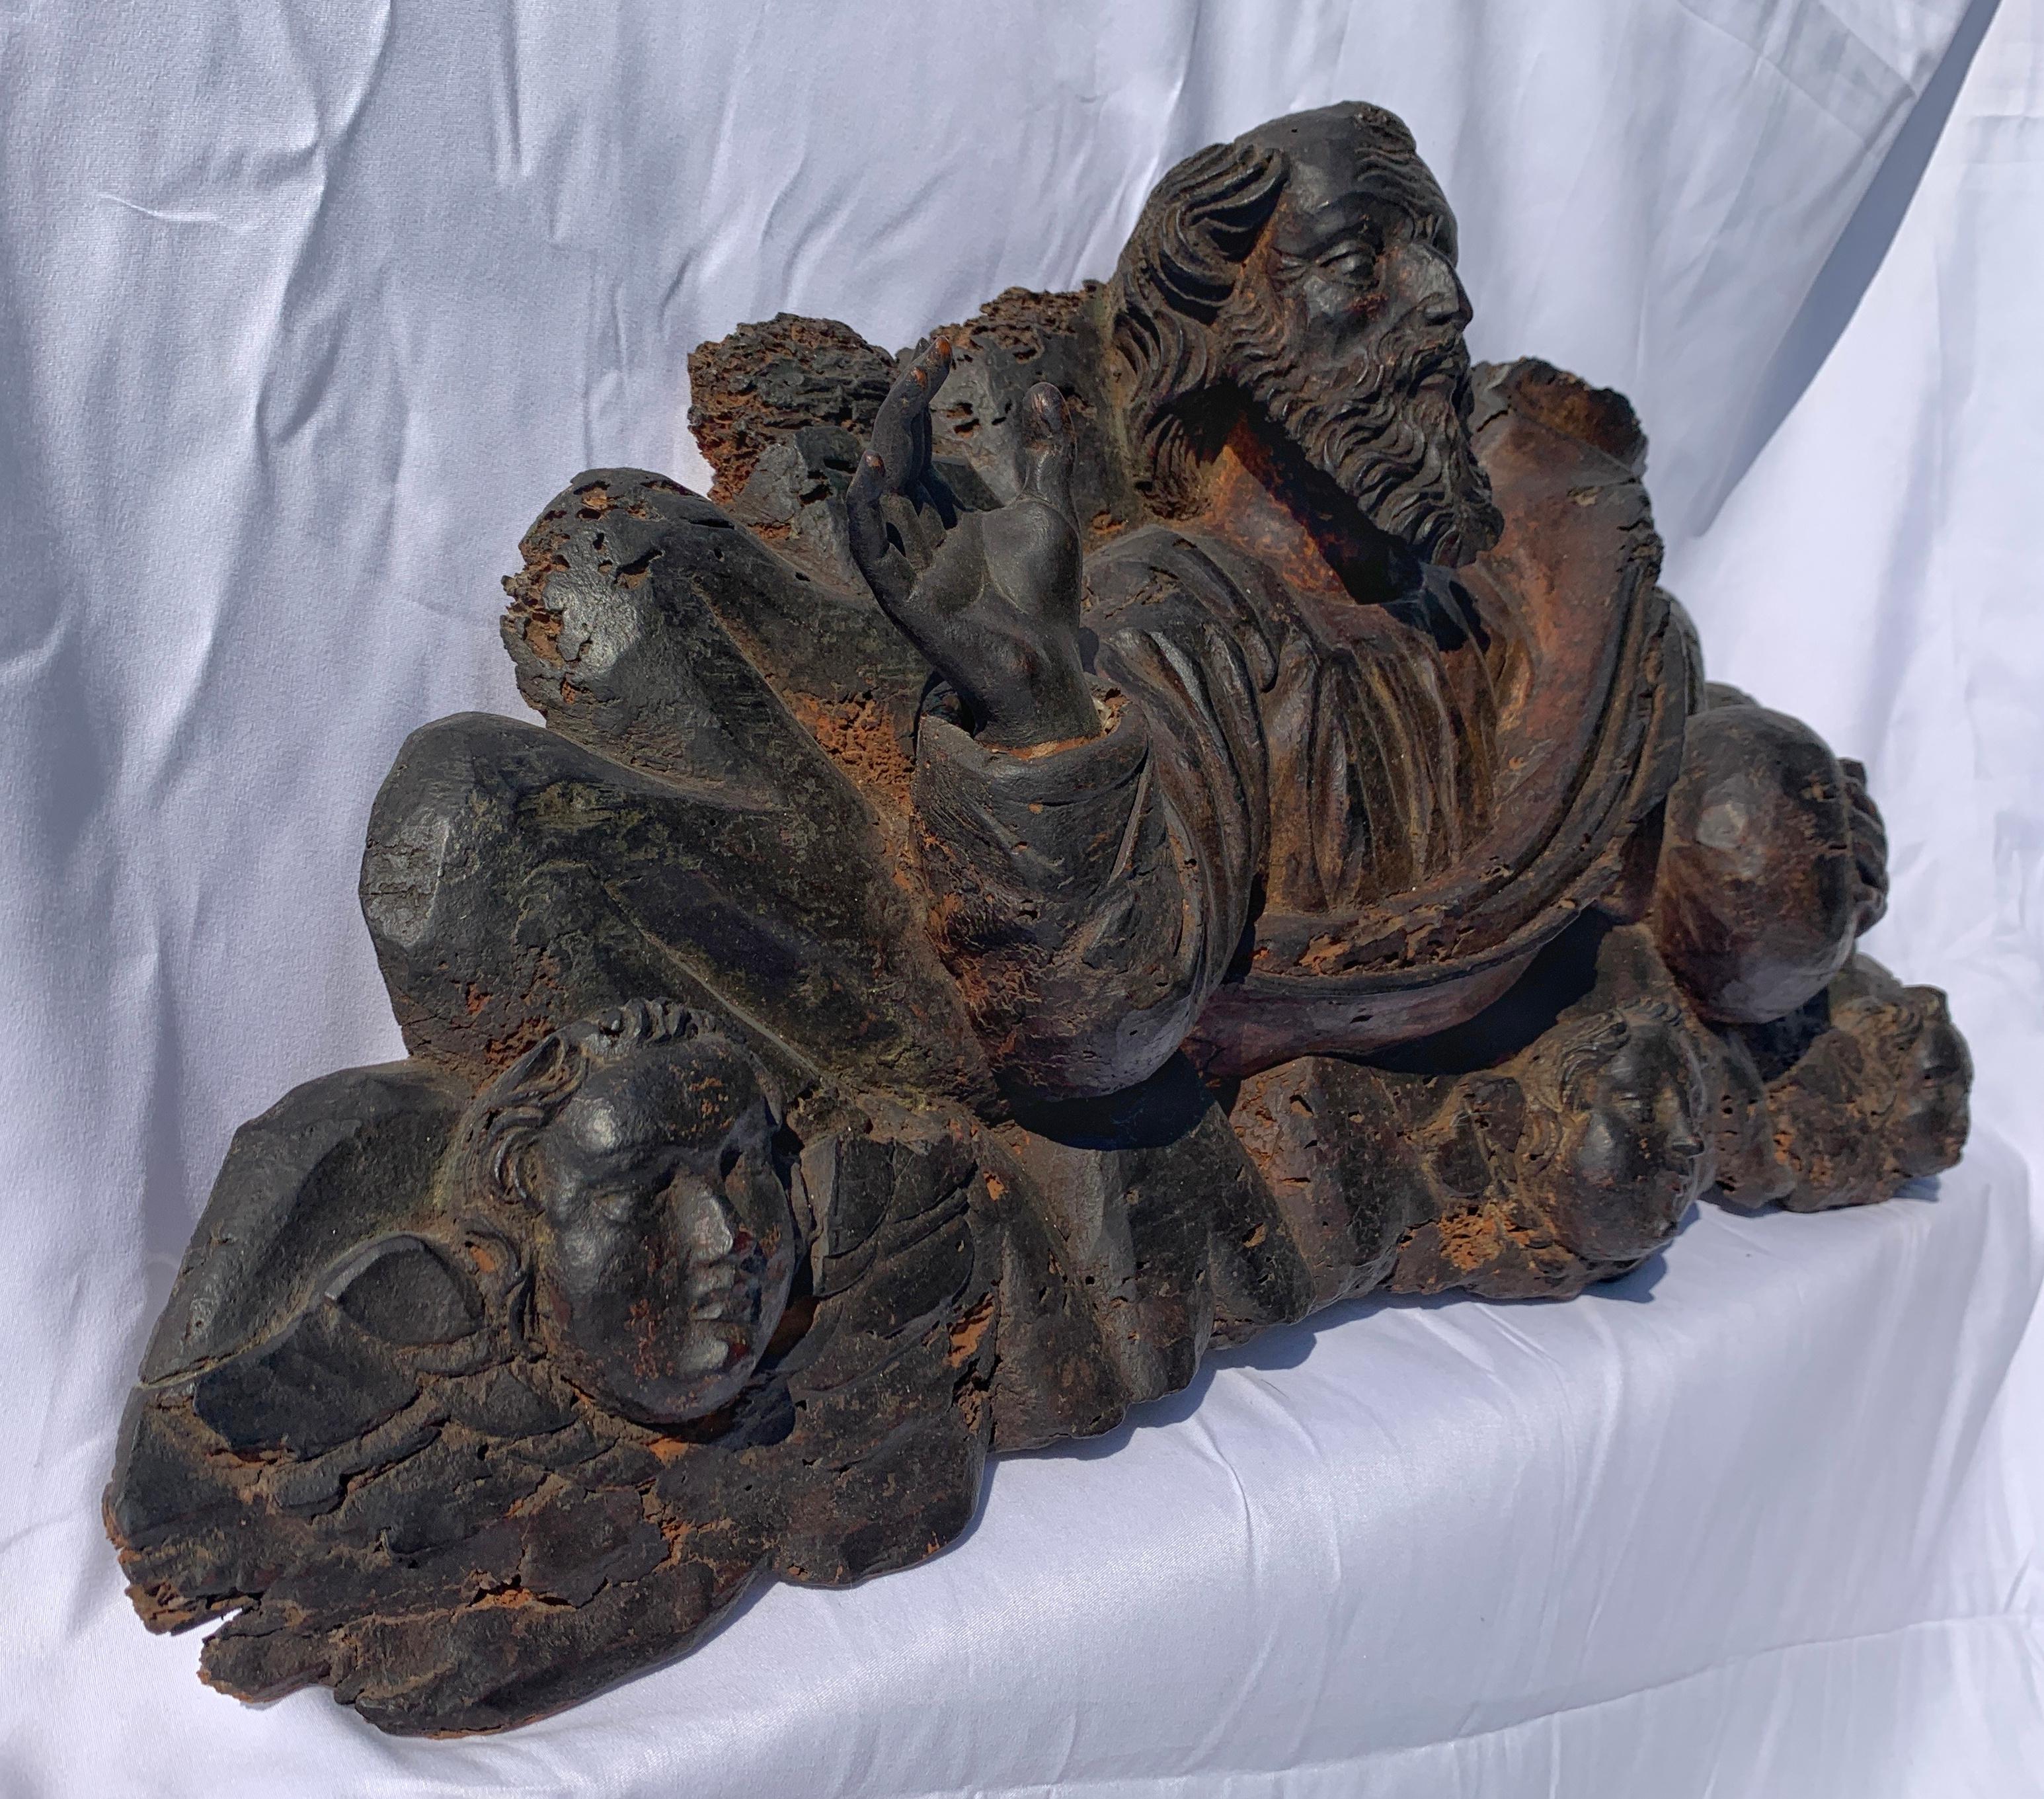 Baroque Italian Sculptor - 17th century carved wood sculpture - God father For Sale 4